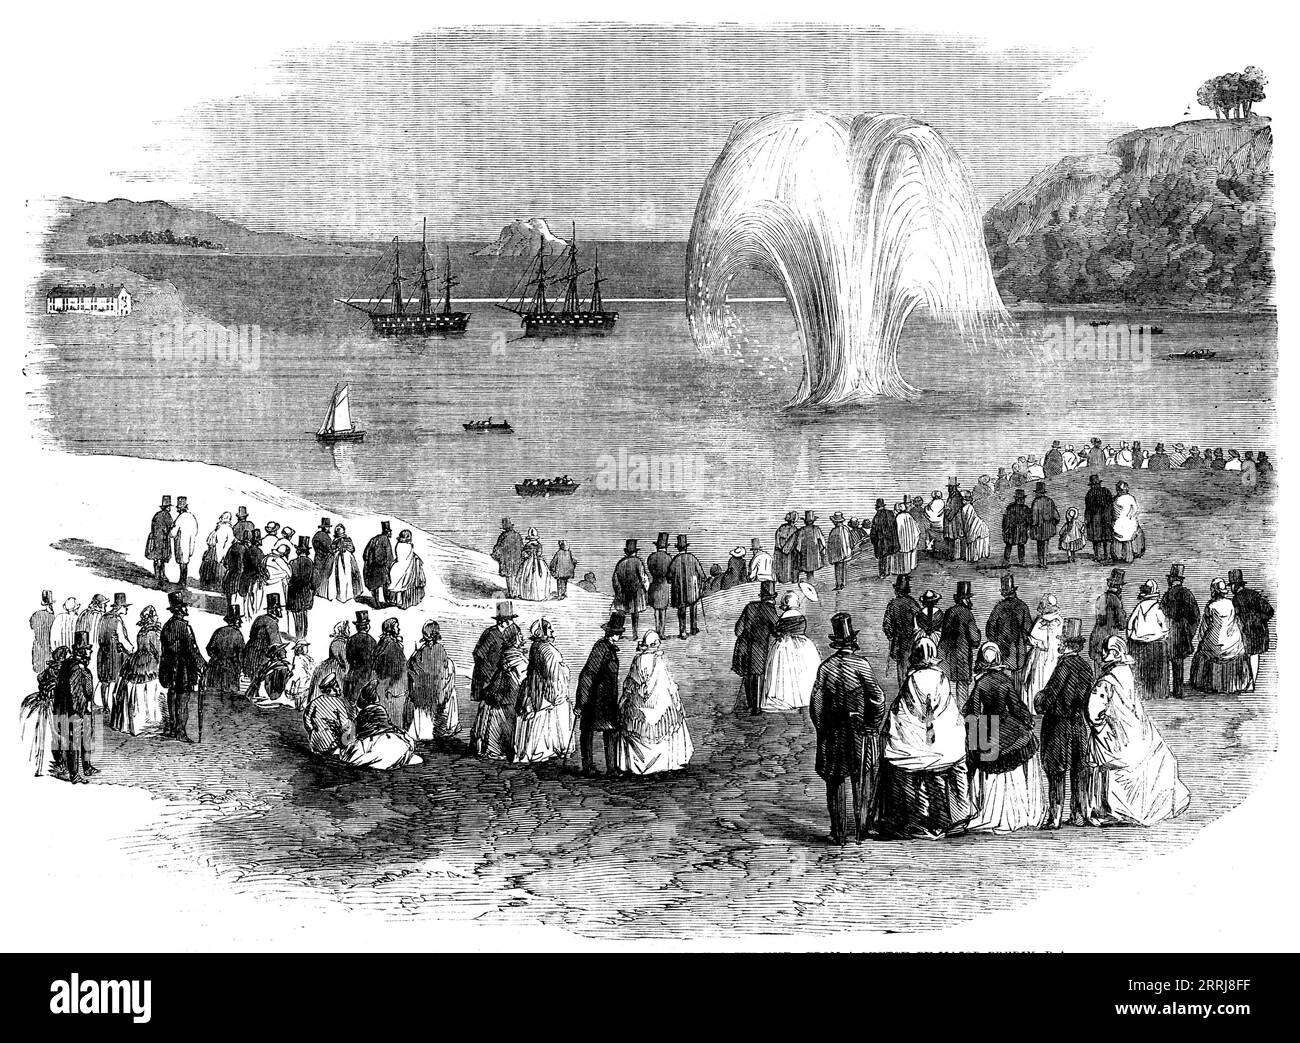 The Blowing Up of the Vanguard Rock at Plymouth on Friday, the 5th November - from a sketch by Major Bredin, R.A., 1858. Displacement of '...the rock at the entrance of the Devonport harbour...One of the huge cylinders sent out to the Crimea during the late war for the purpose of blowing up the sunken fleet at Sebastopol, but shipped home again without being applied to that end, was the means employed...the cylinder, which was fourteen feet in length and four feet five inches in diameter, and which contained about a ton of gunpowder, was sunk into position...Thirteen minutes after the fuse was Stock Photo